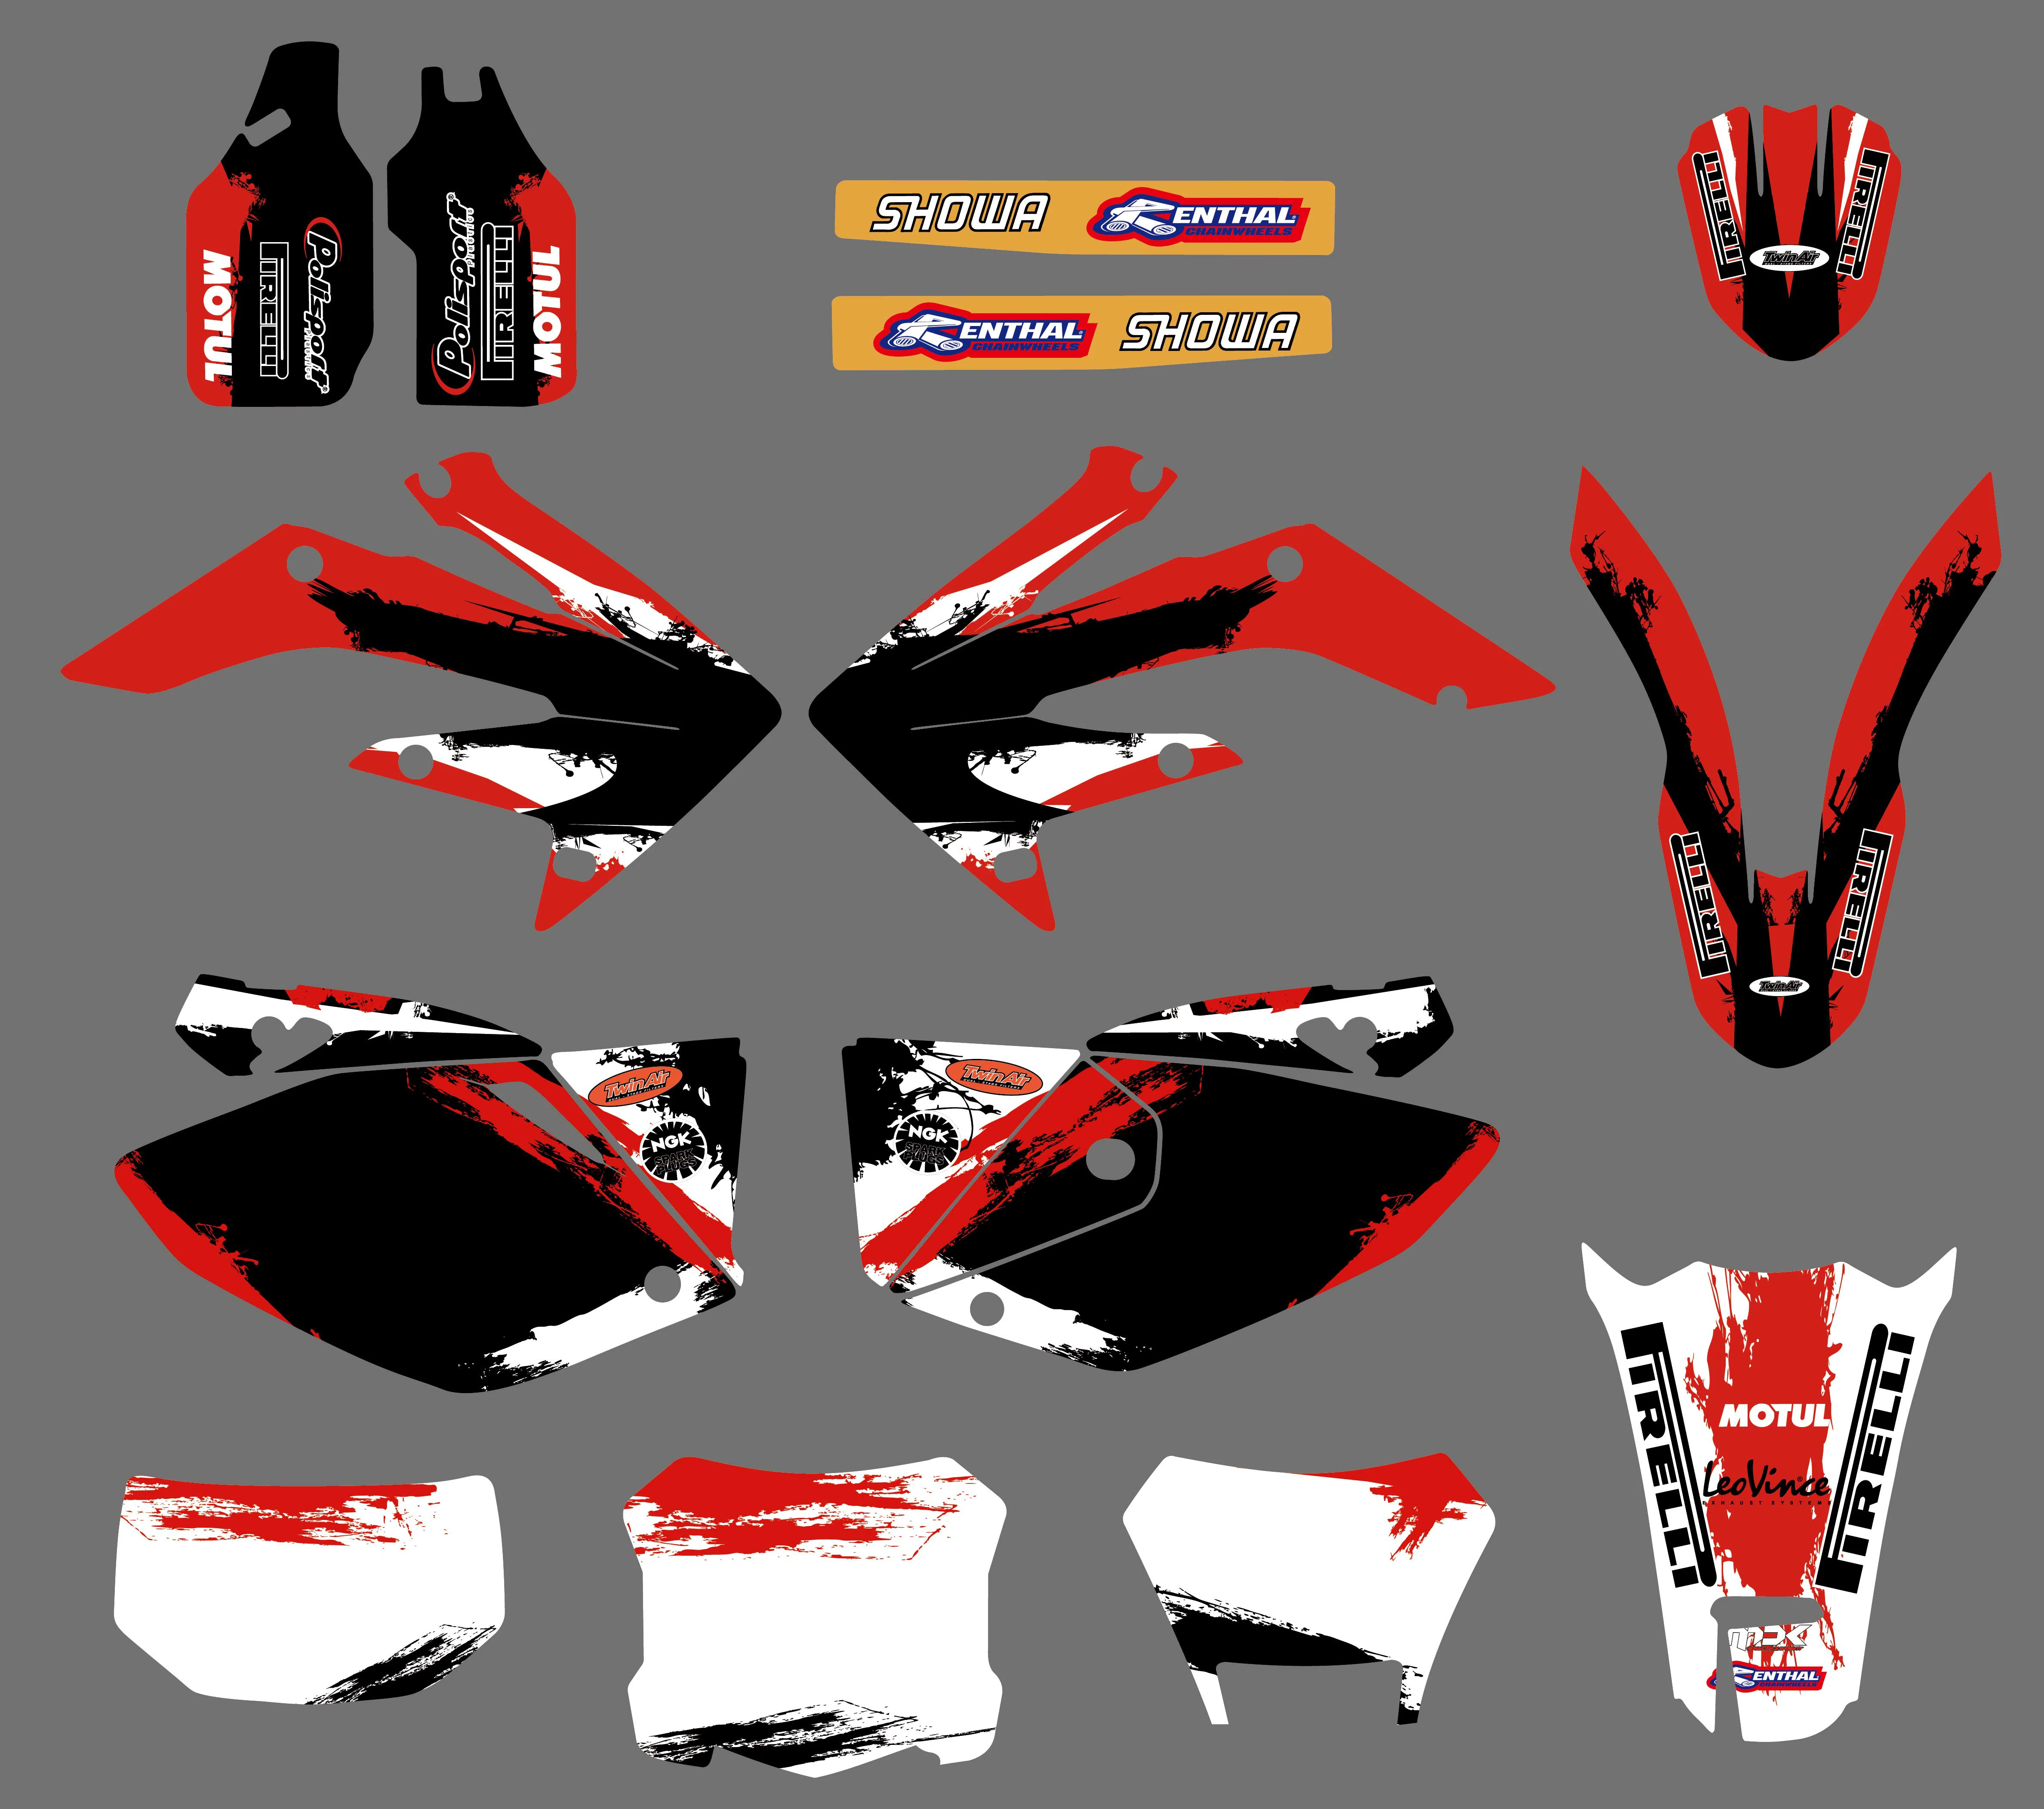 Motorcycle Graphics Decal Sticker Kit for Honda CRF250X CRF 250X 2004-2012 2005 2006 2007 2008 2009 2010 2011 Customized Gift